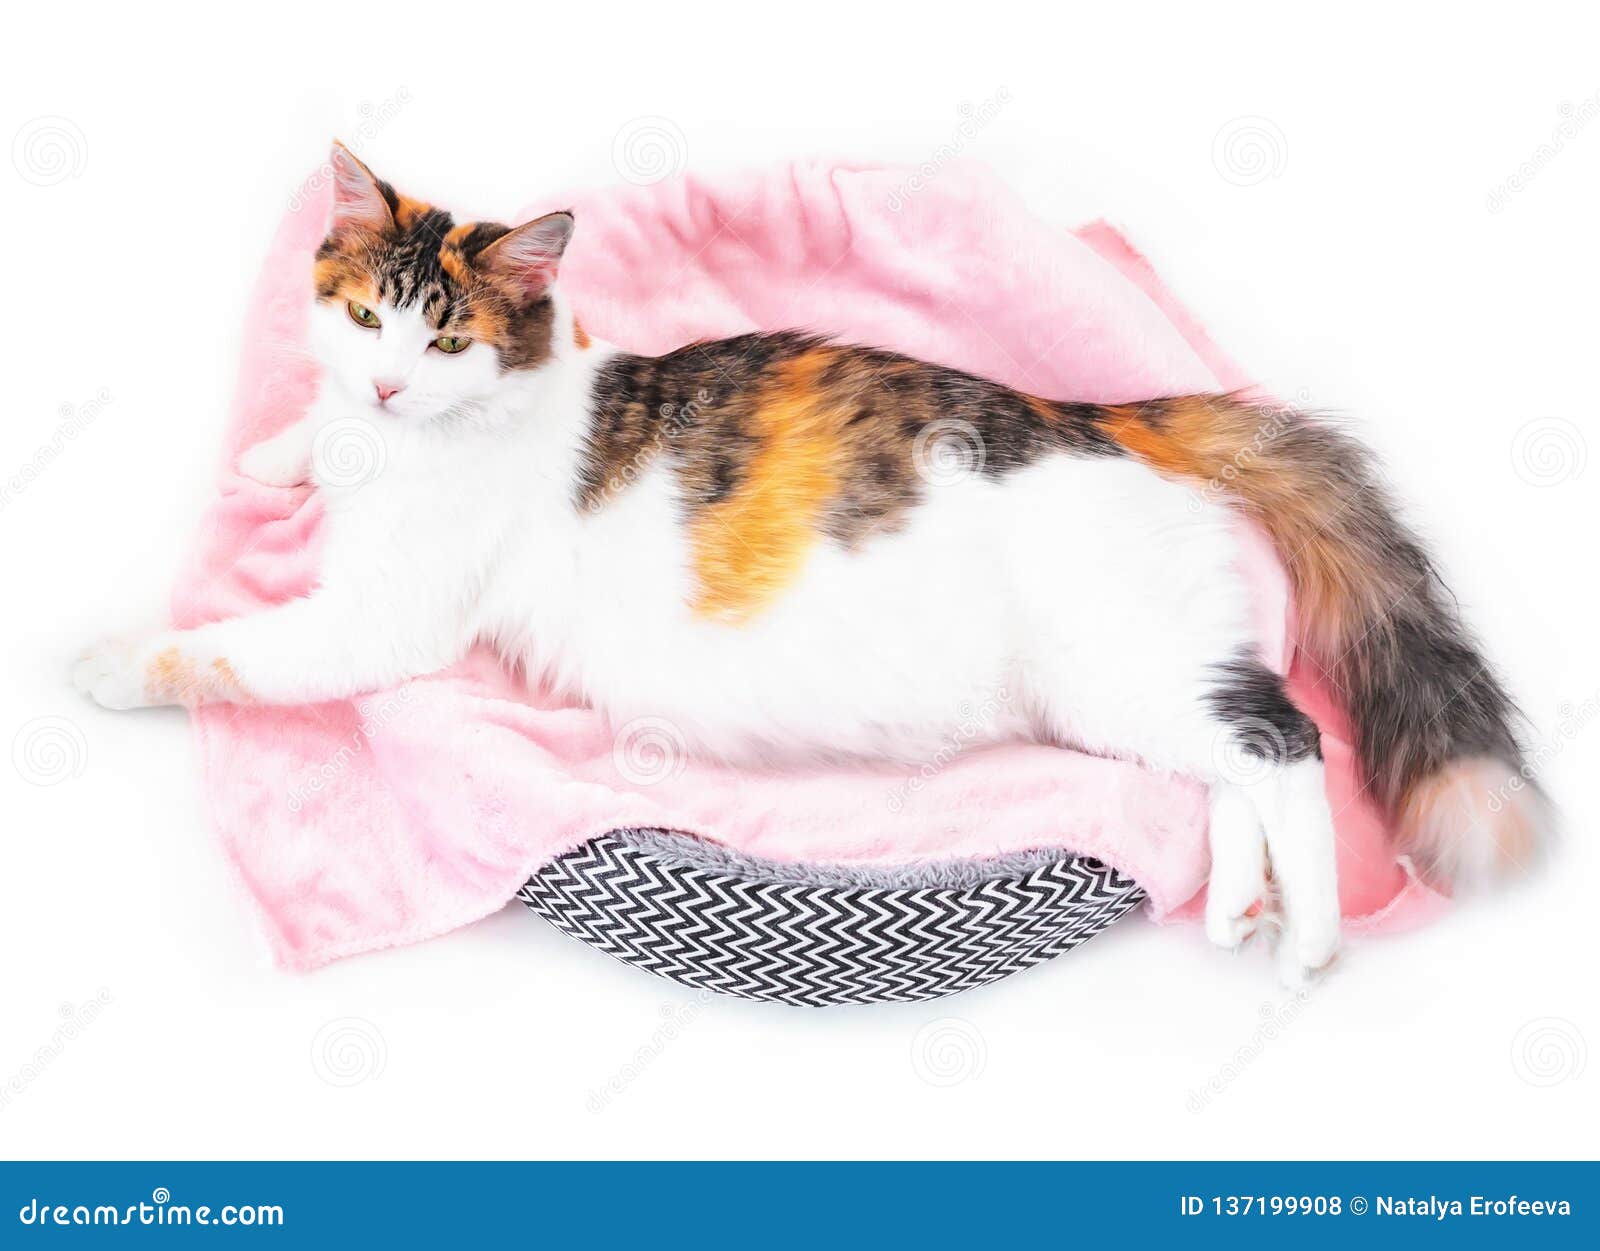 Cat Pregnancy Pregnant Calico Cat With Big Belly Laying On The Pink